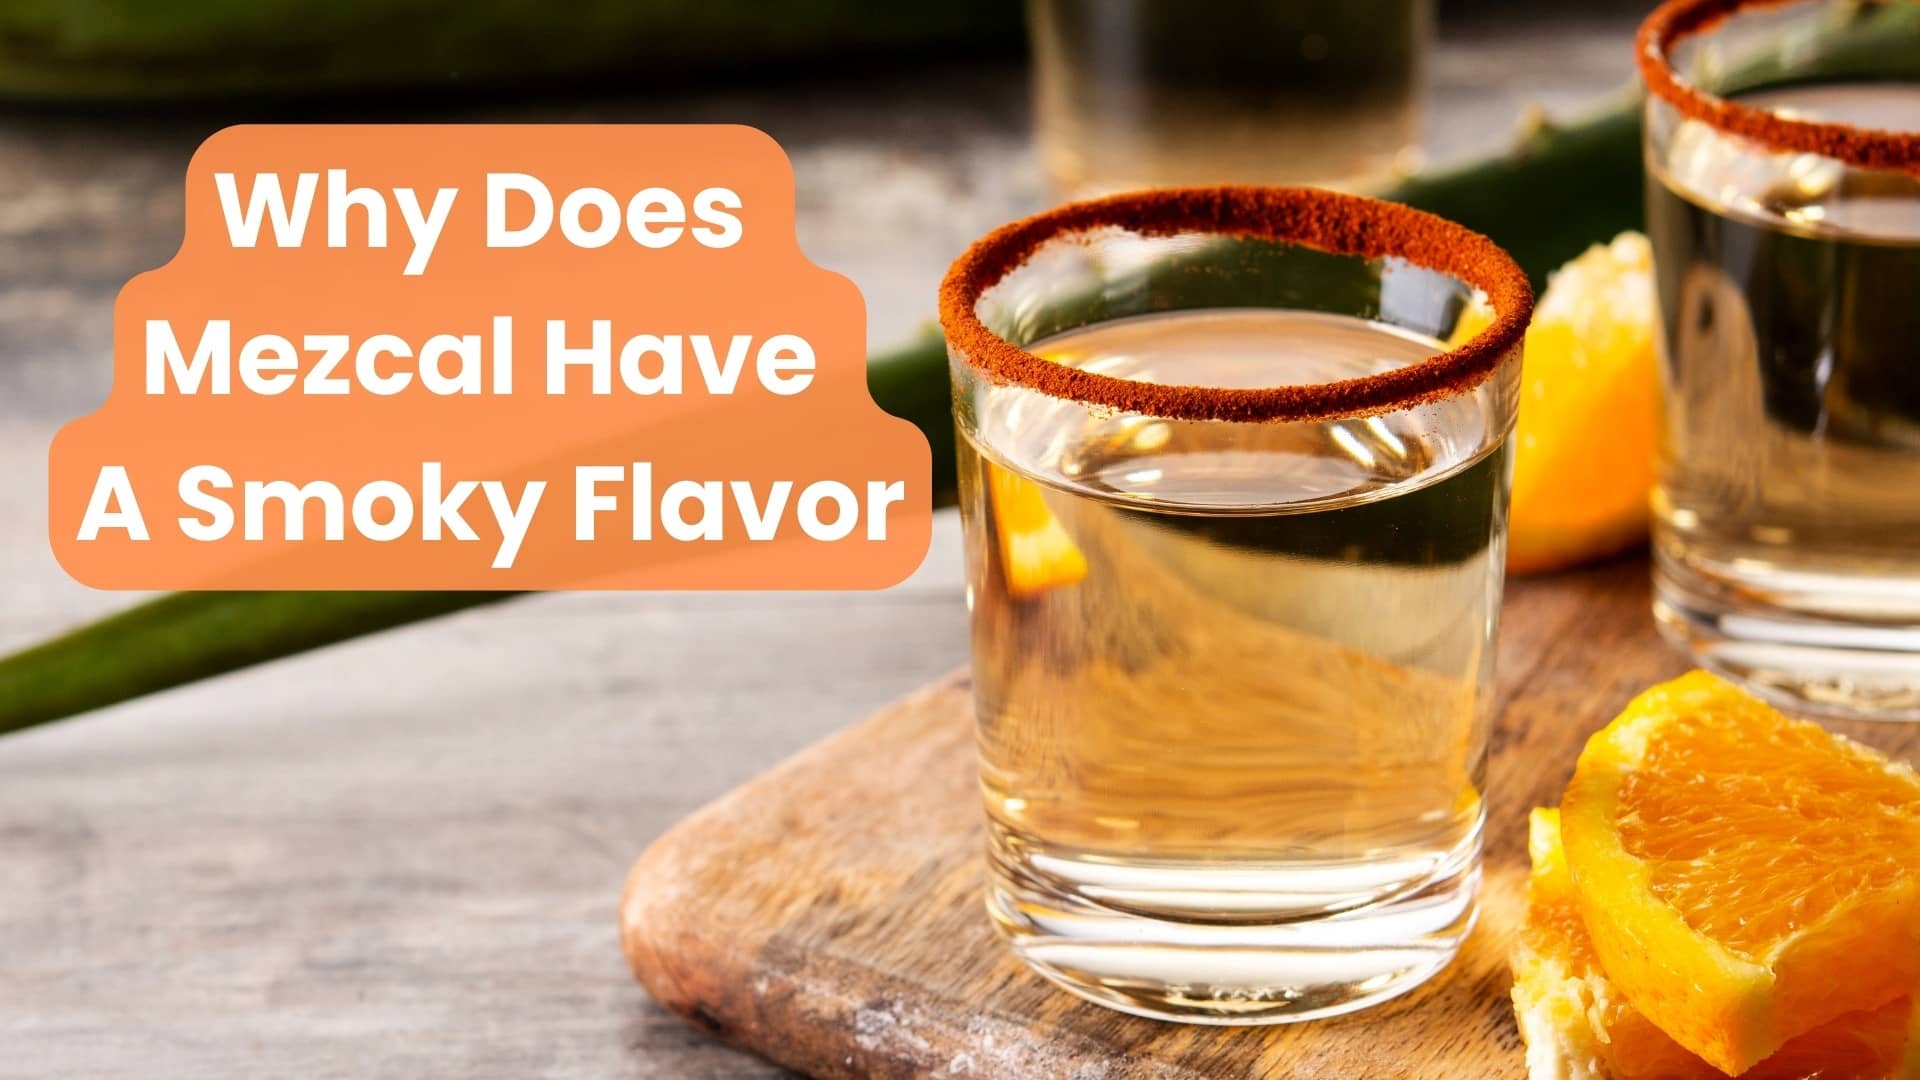 Why Does Mezcal Have A Smoky Flavor?